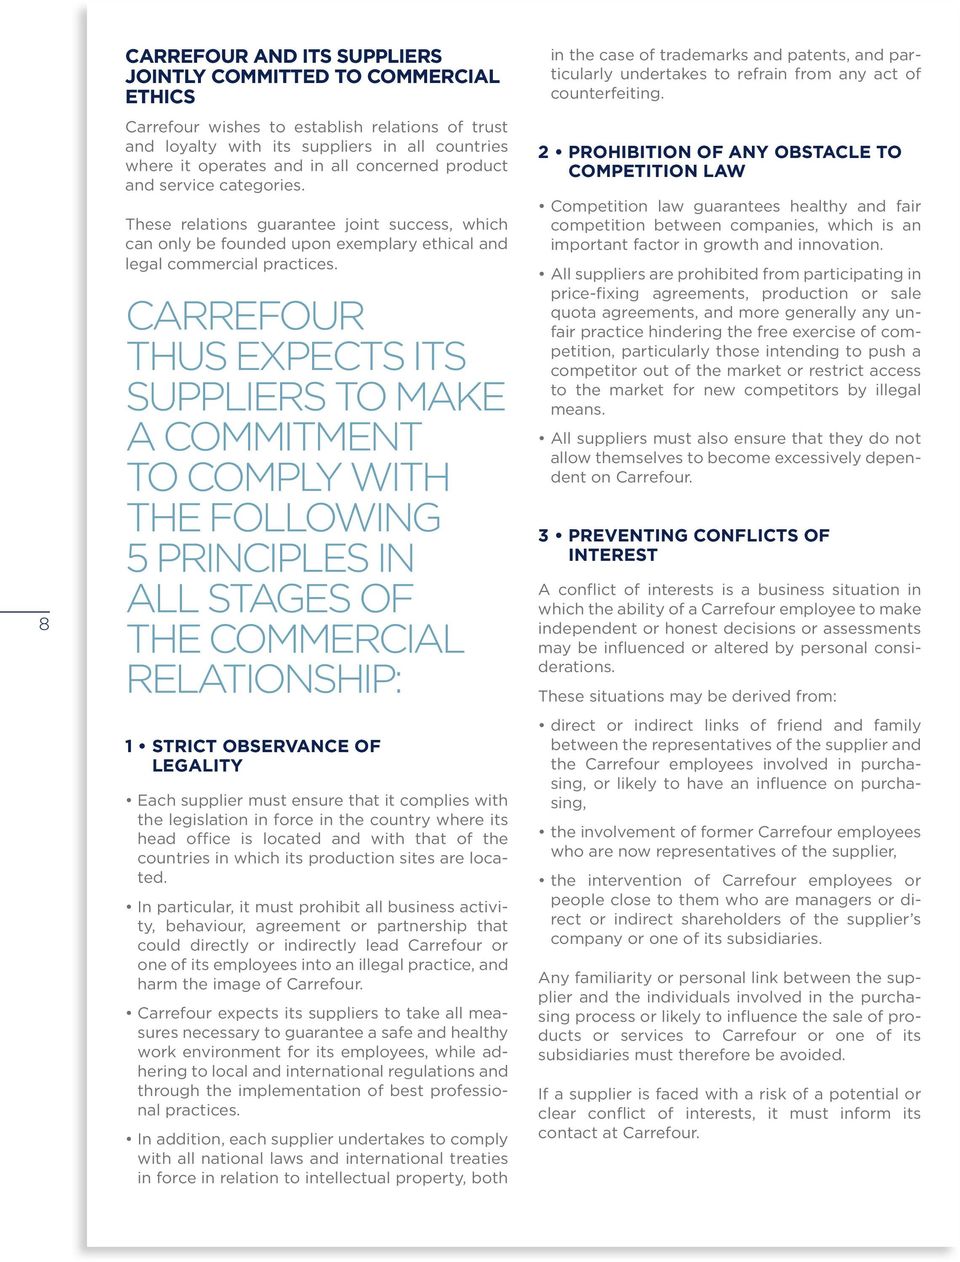 CARREFOUR THUS EXPECTS ITS SUPPLIERS TO MAKE A COMMITMENT TO COMPLY WITH THE FOLLOWING 5 PRINCIPLES IN ALL STAGES OF THE COMMERCIAL RELATIONSHIP: 1 STRICT OBSERVANCE OF LEGALITY Each supplier must